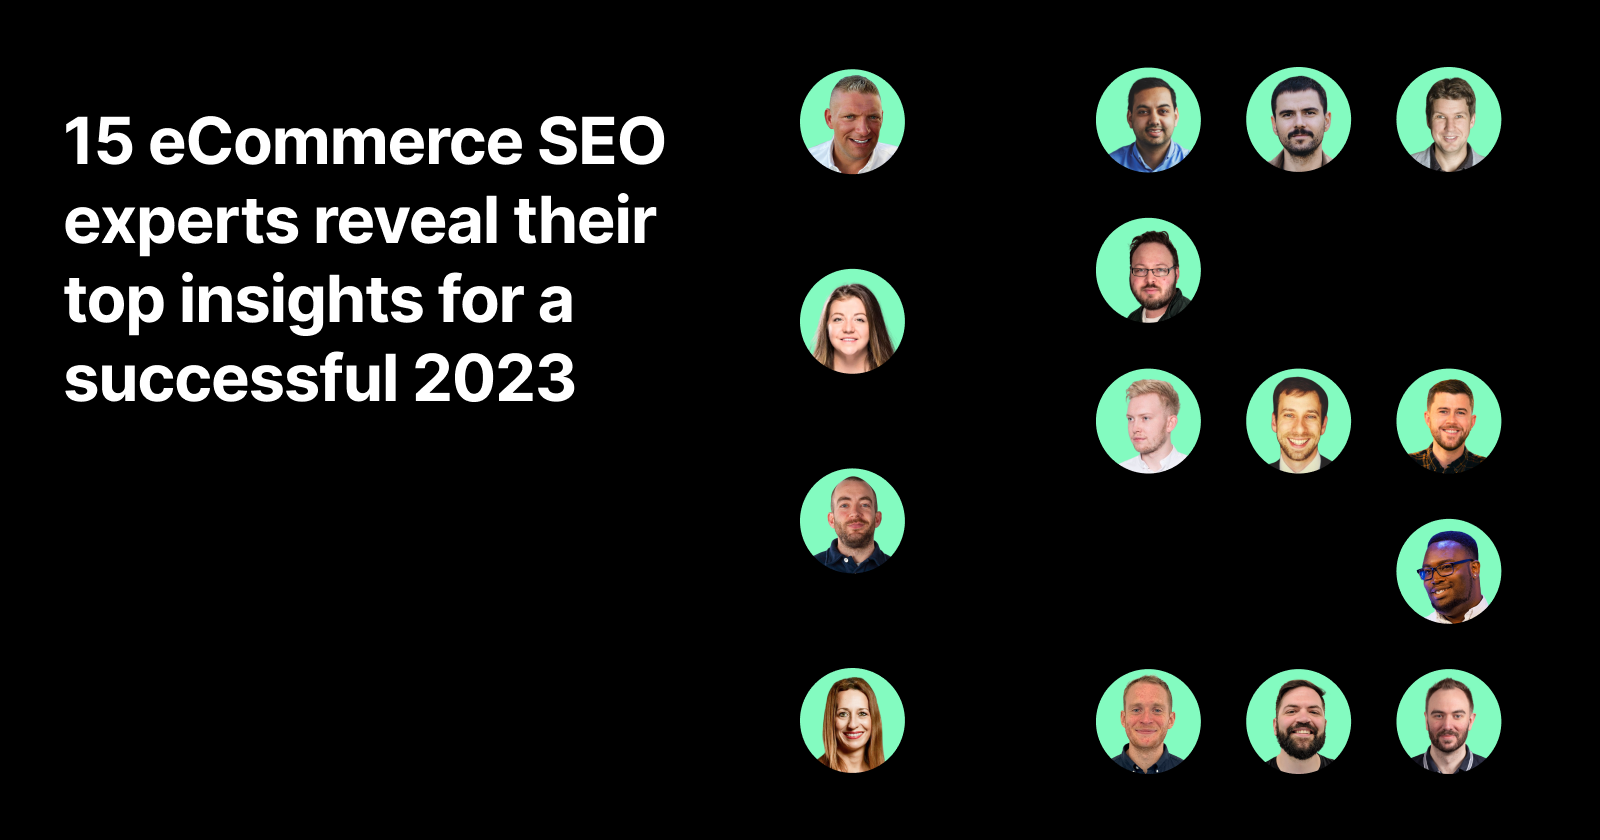 15 Ecommerce SEO Experts Reveal Top Insights For 2023